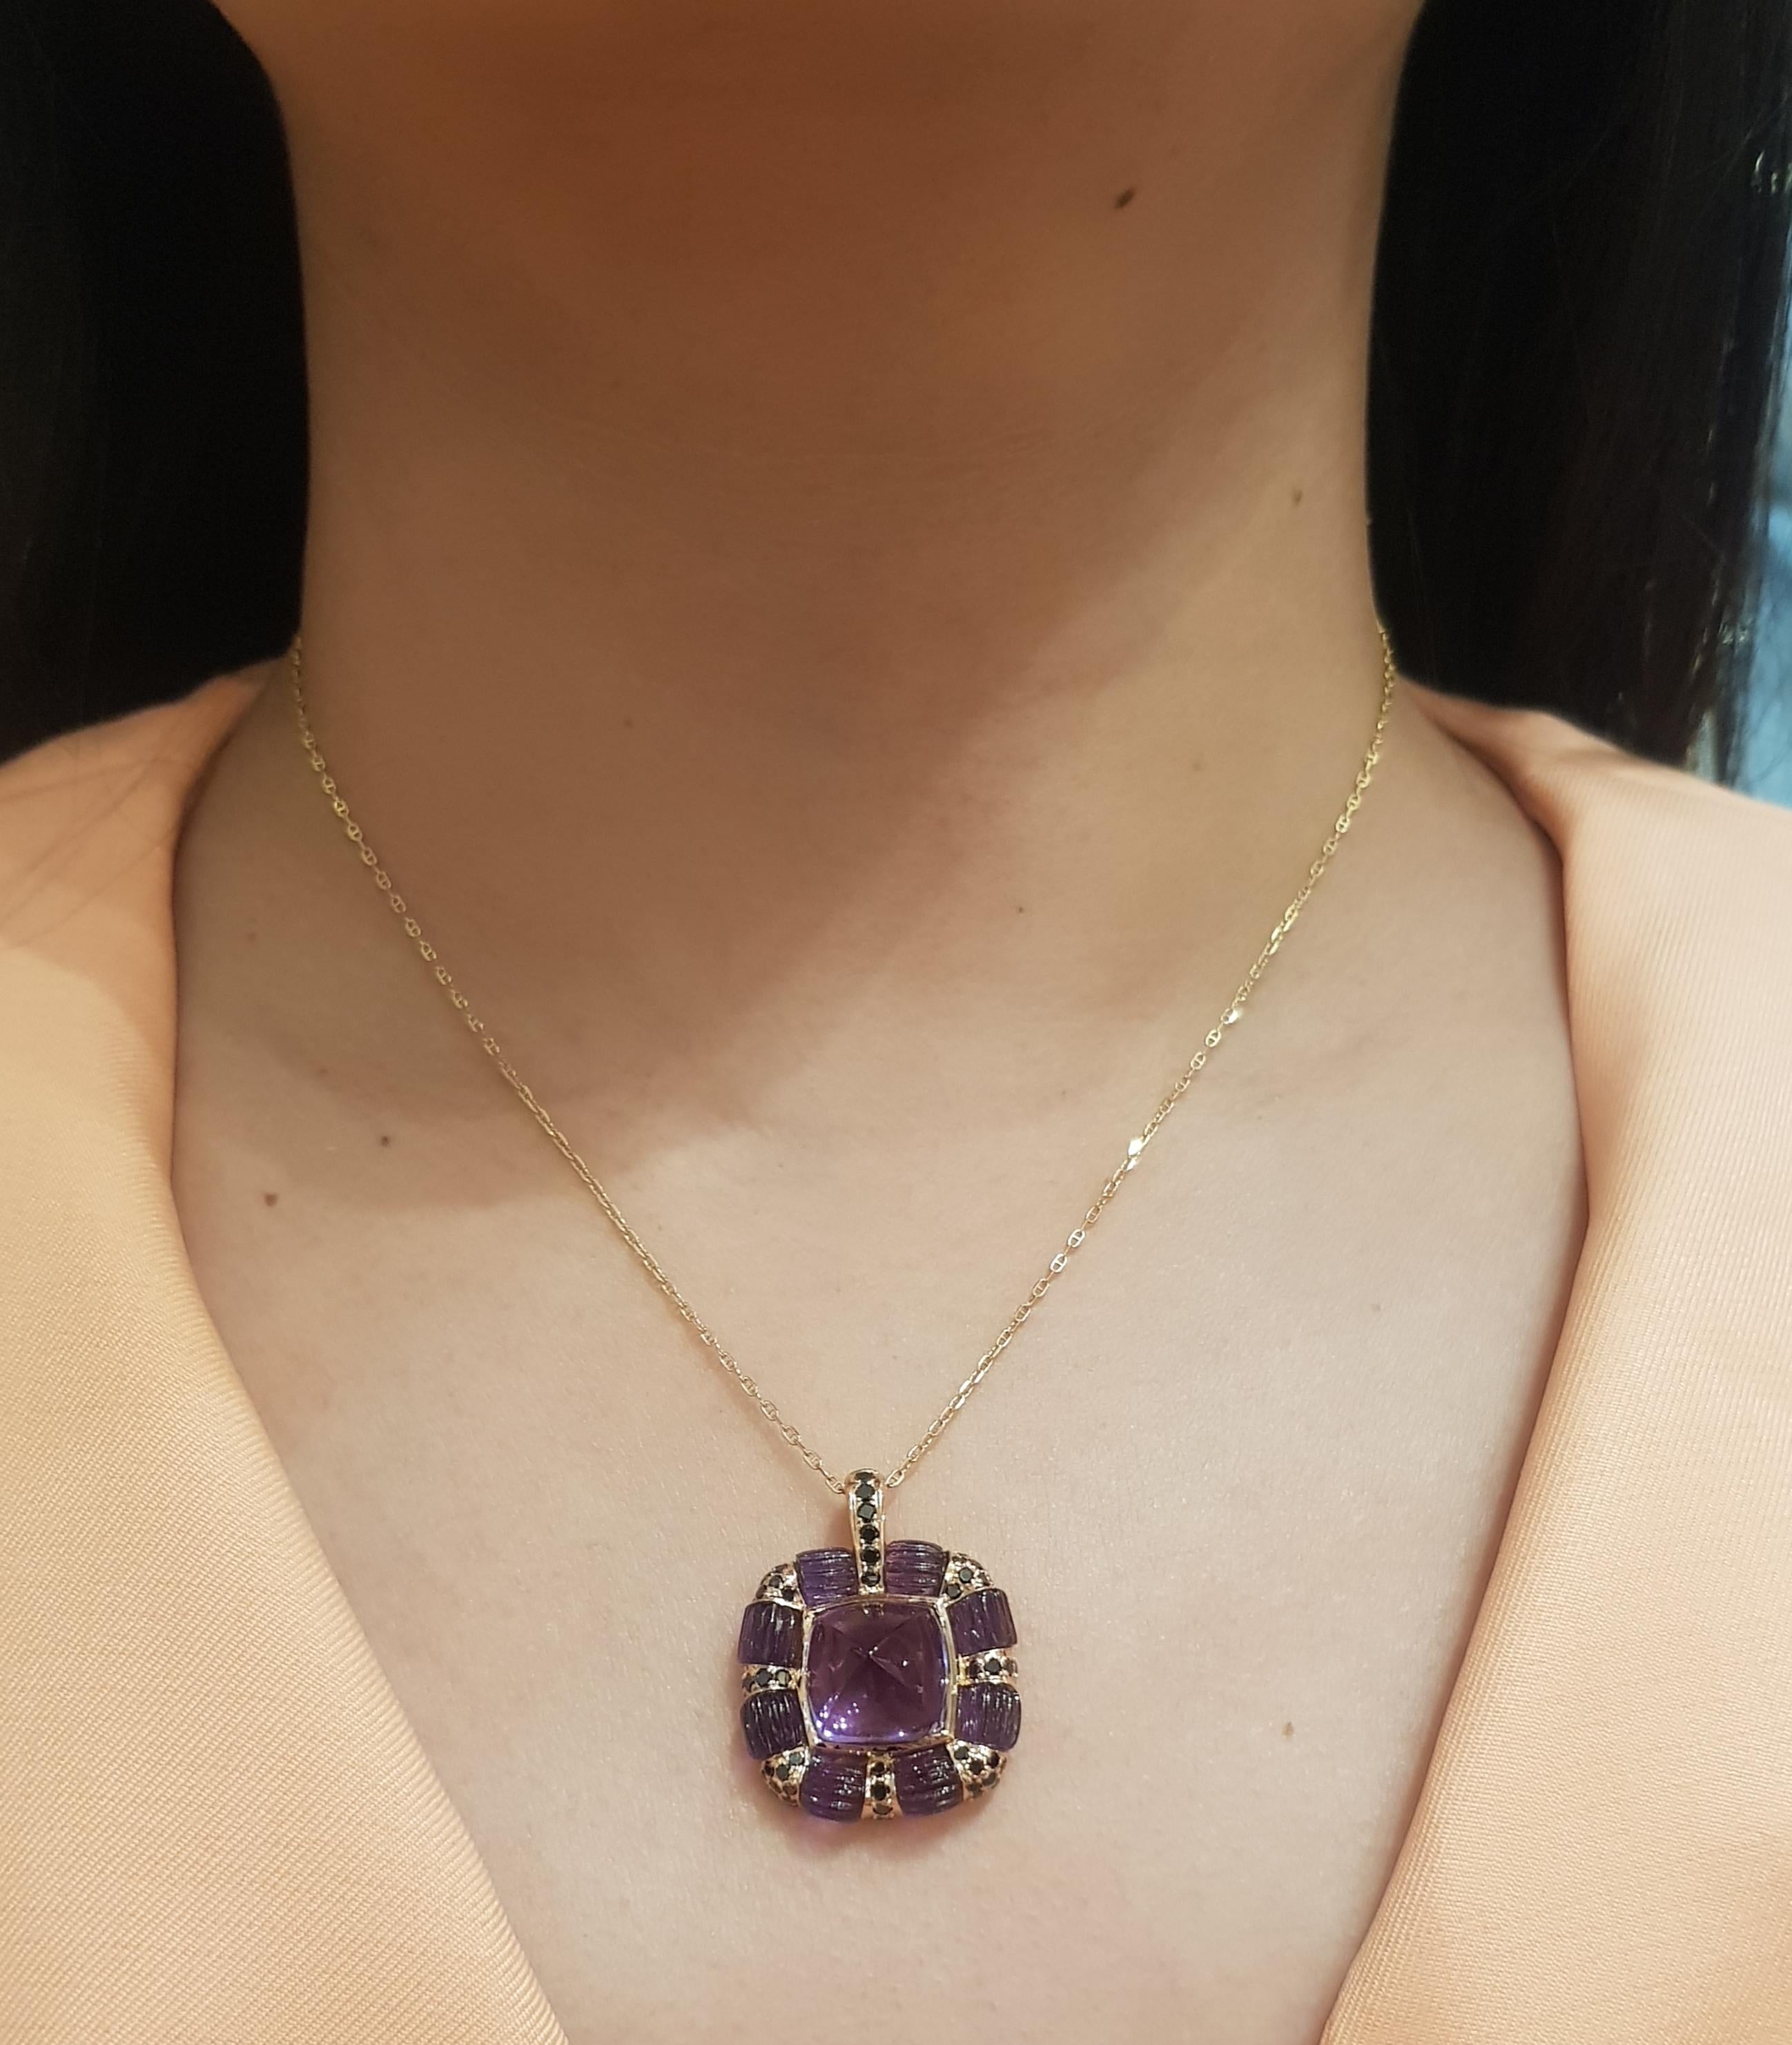 Sugarloaf Amethyst 8.28 carats, Cabochon Amethyst 7.38 carats and Black Diamond 0.78 carat Pendant set in 18K Rose Gold Settings
(chain not included)

Width: 2.2 cm 
Length: 2.9  cm
Total Weight: 9.37 grams

